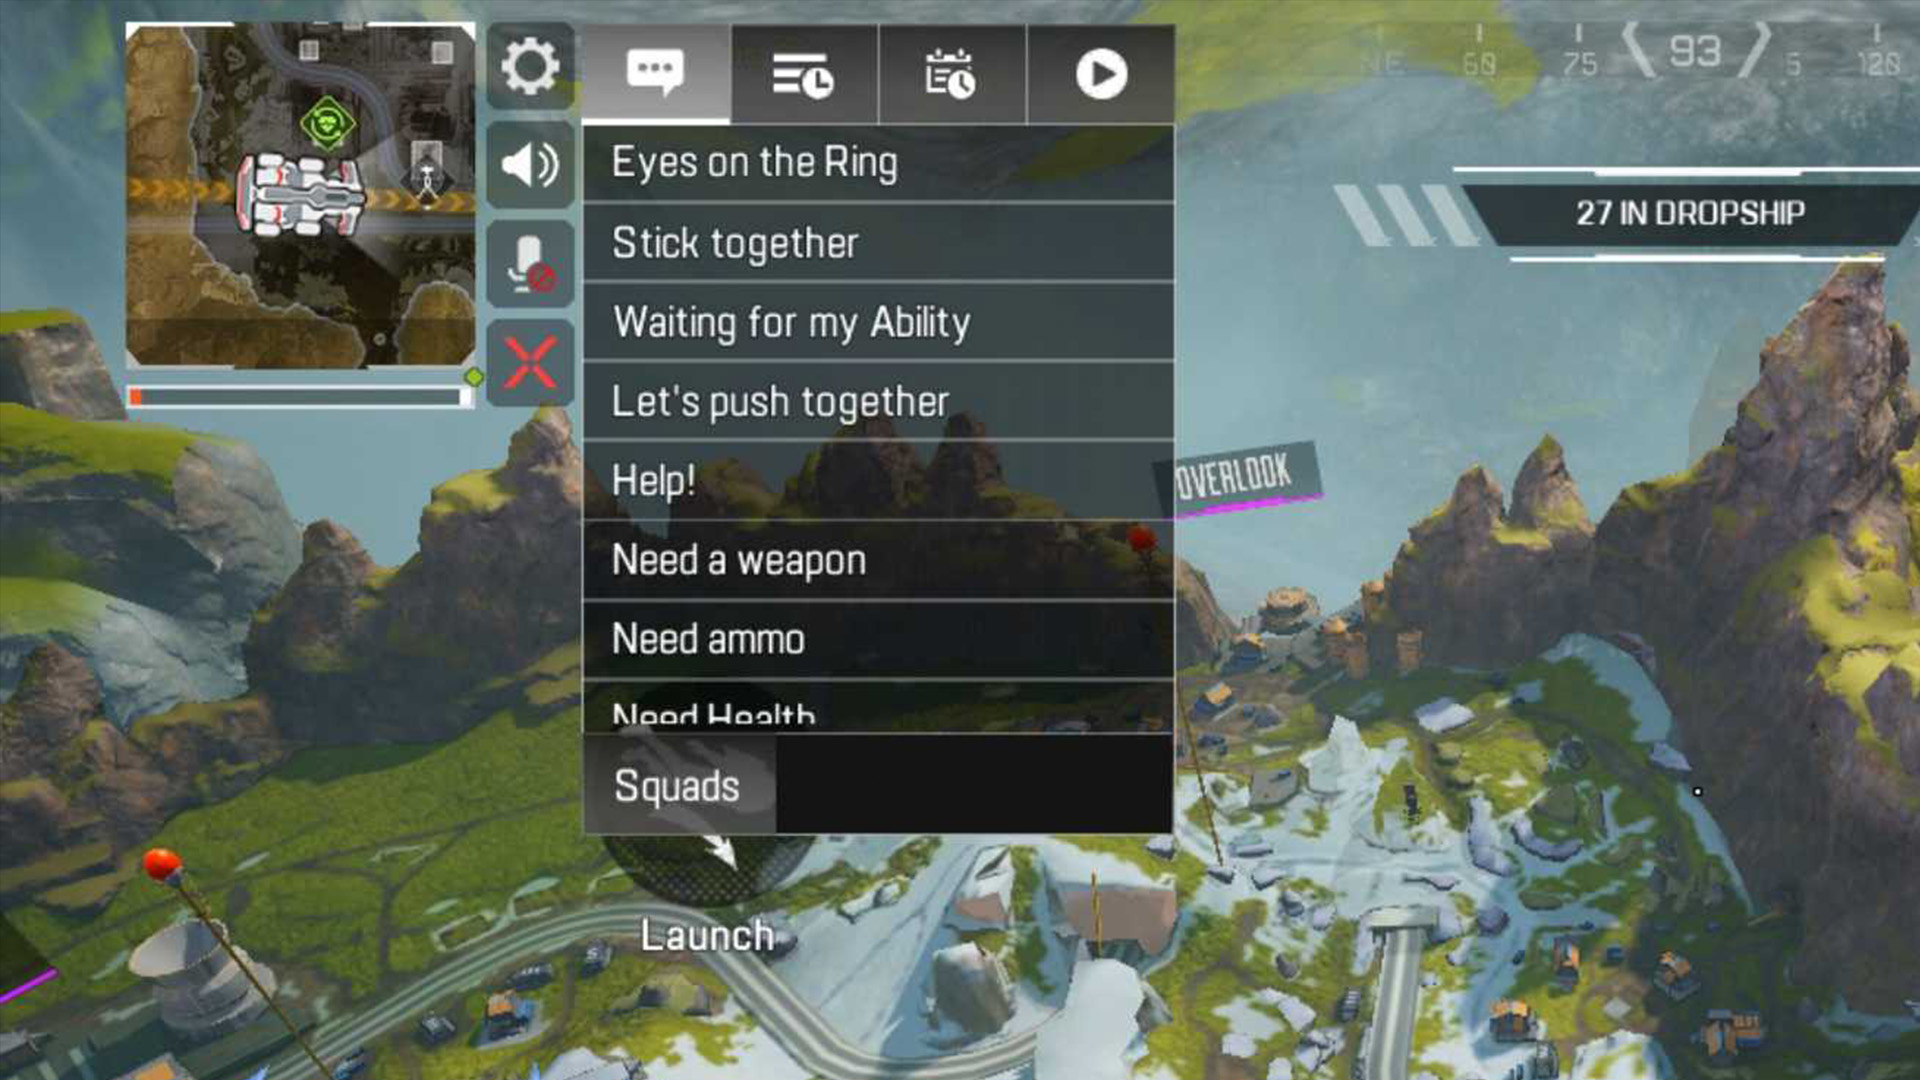 How to turn off voice chat in apex legends